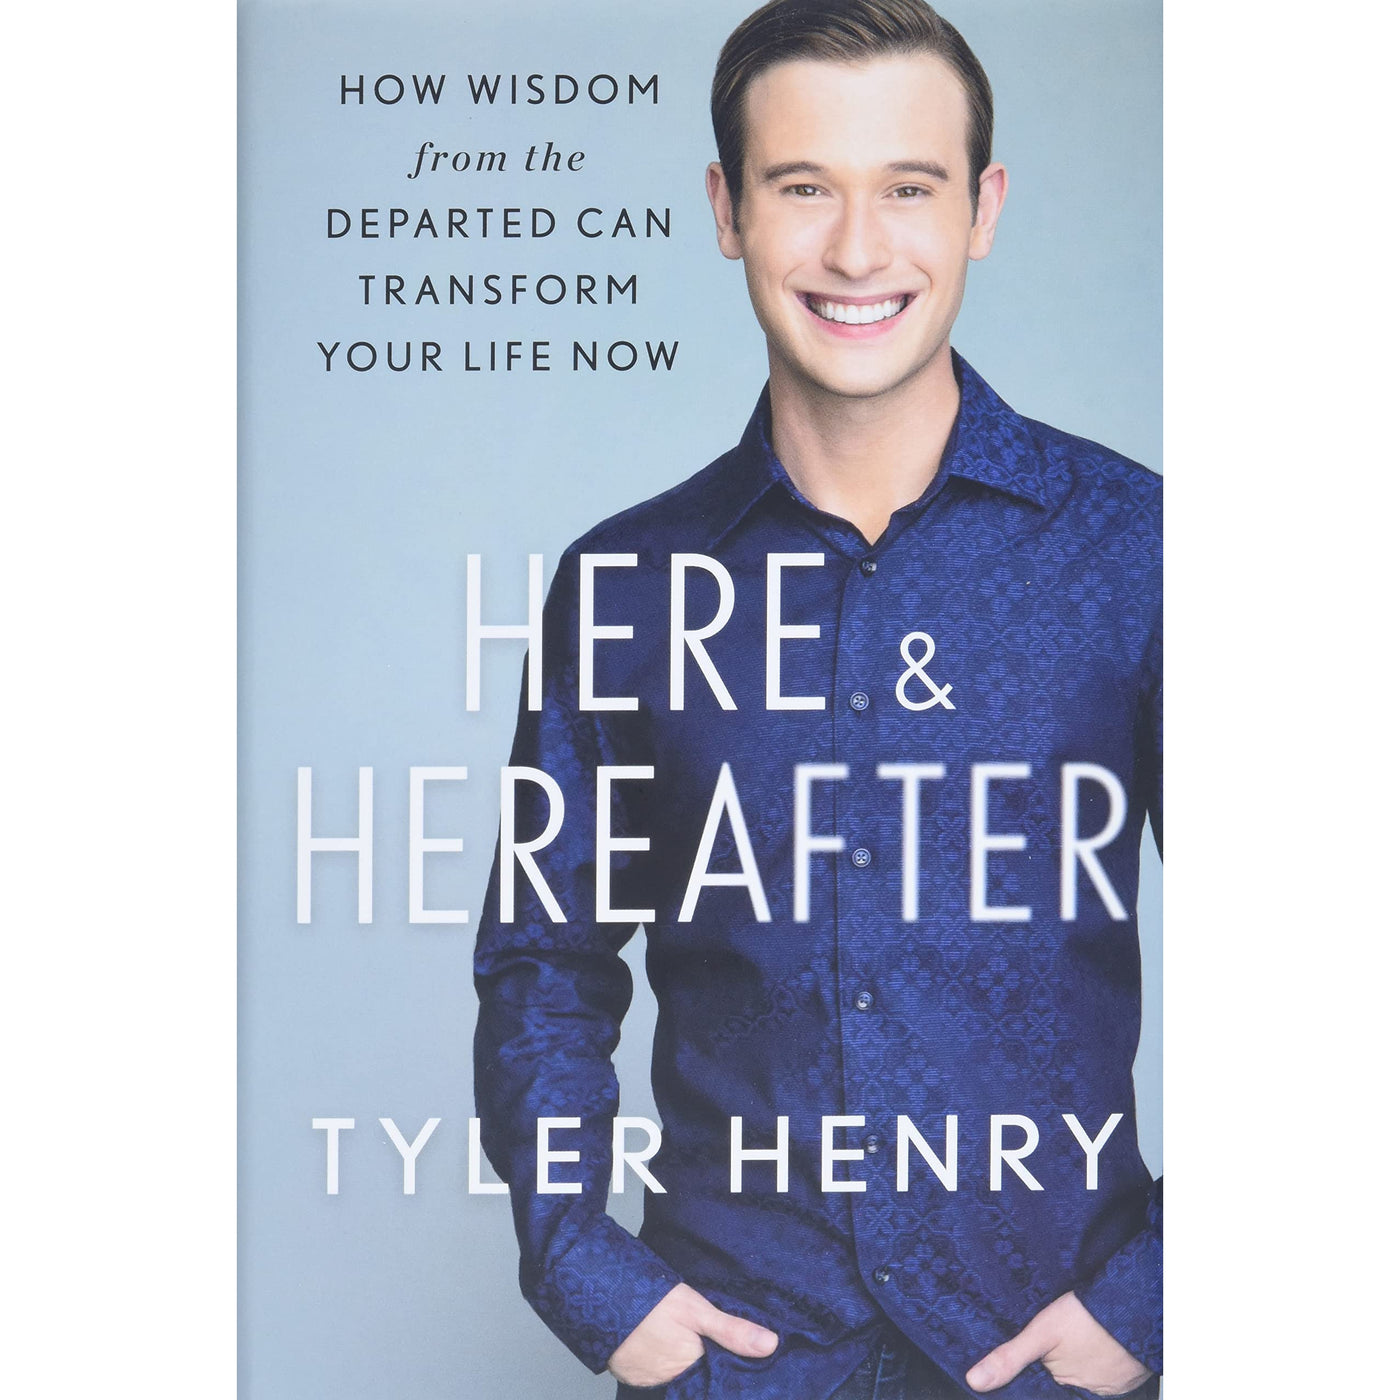 Here & Hereafter: How Wisdom from the Departed Can Transform Your Life Now By Tyler Henry